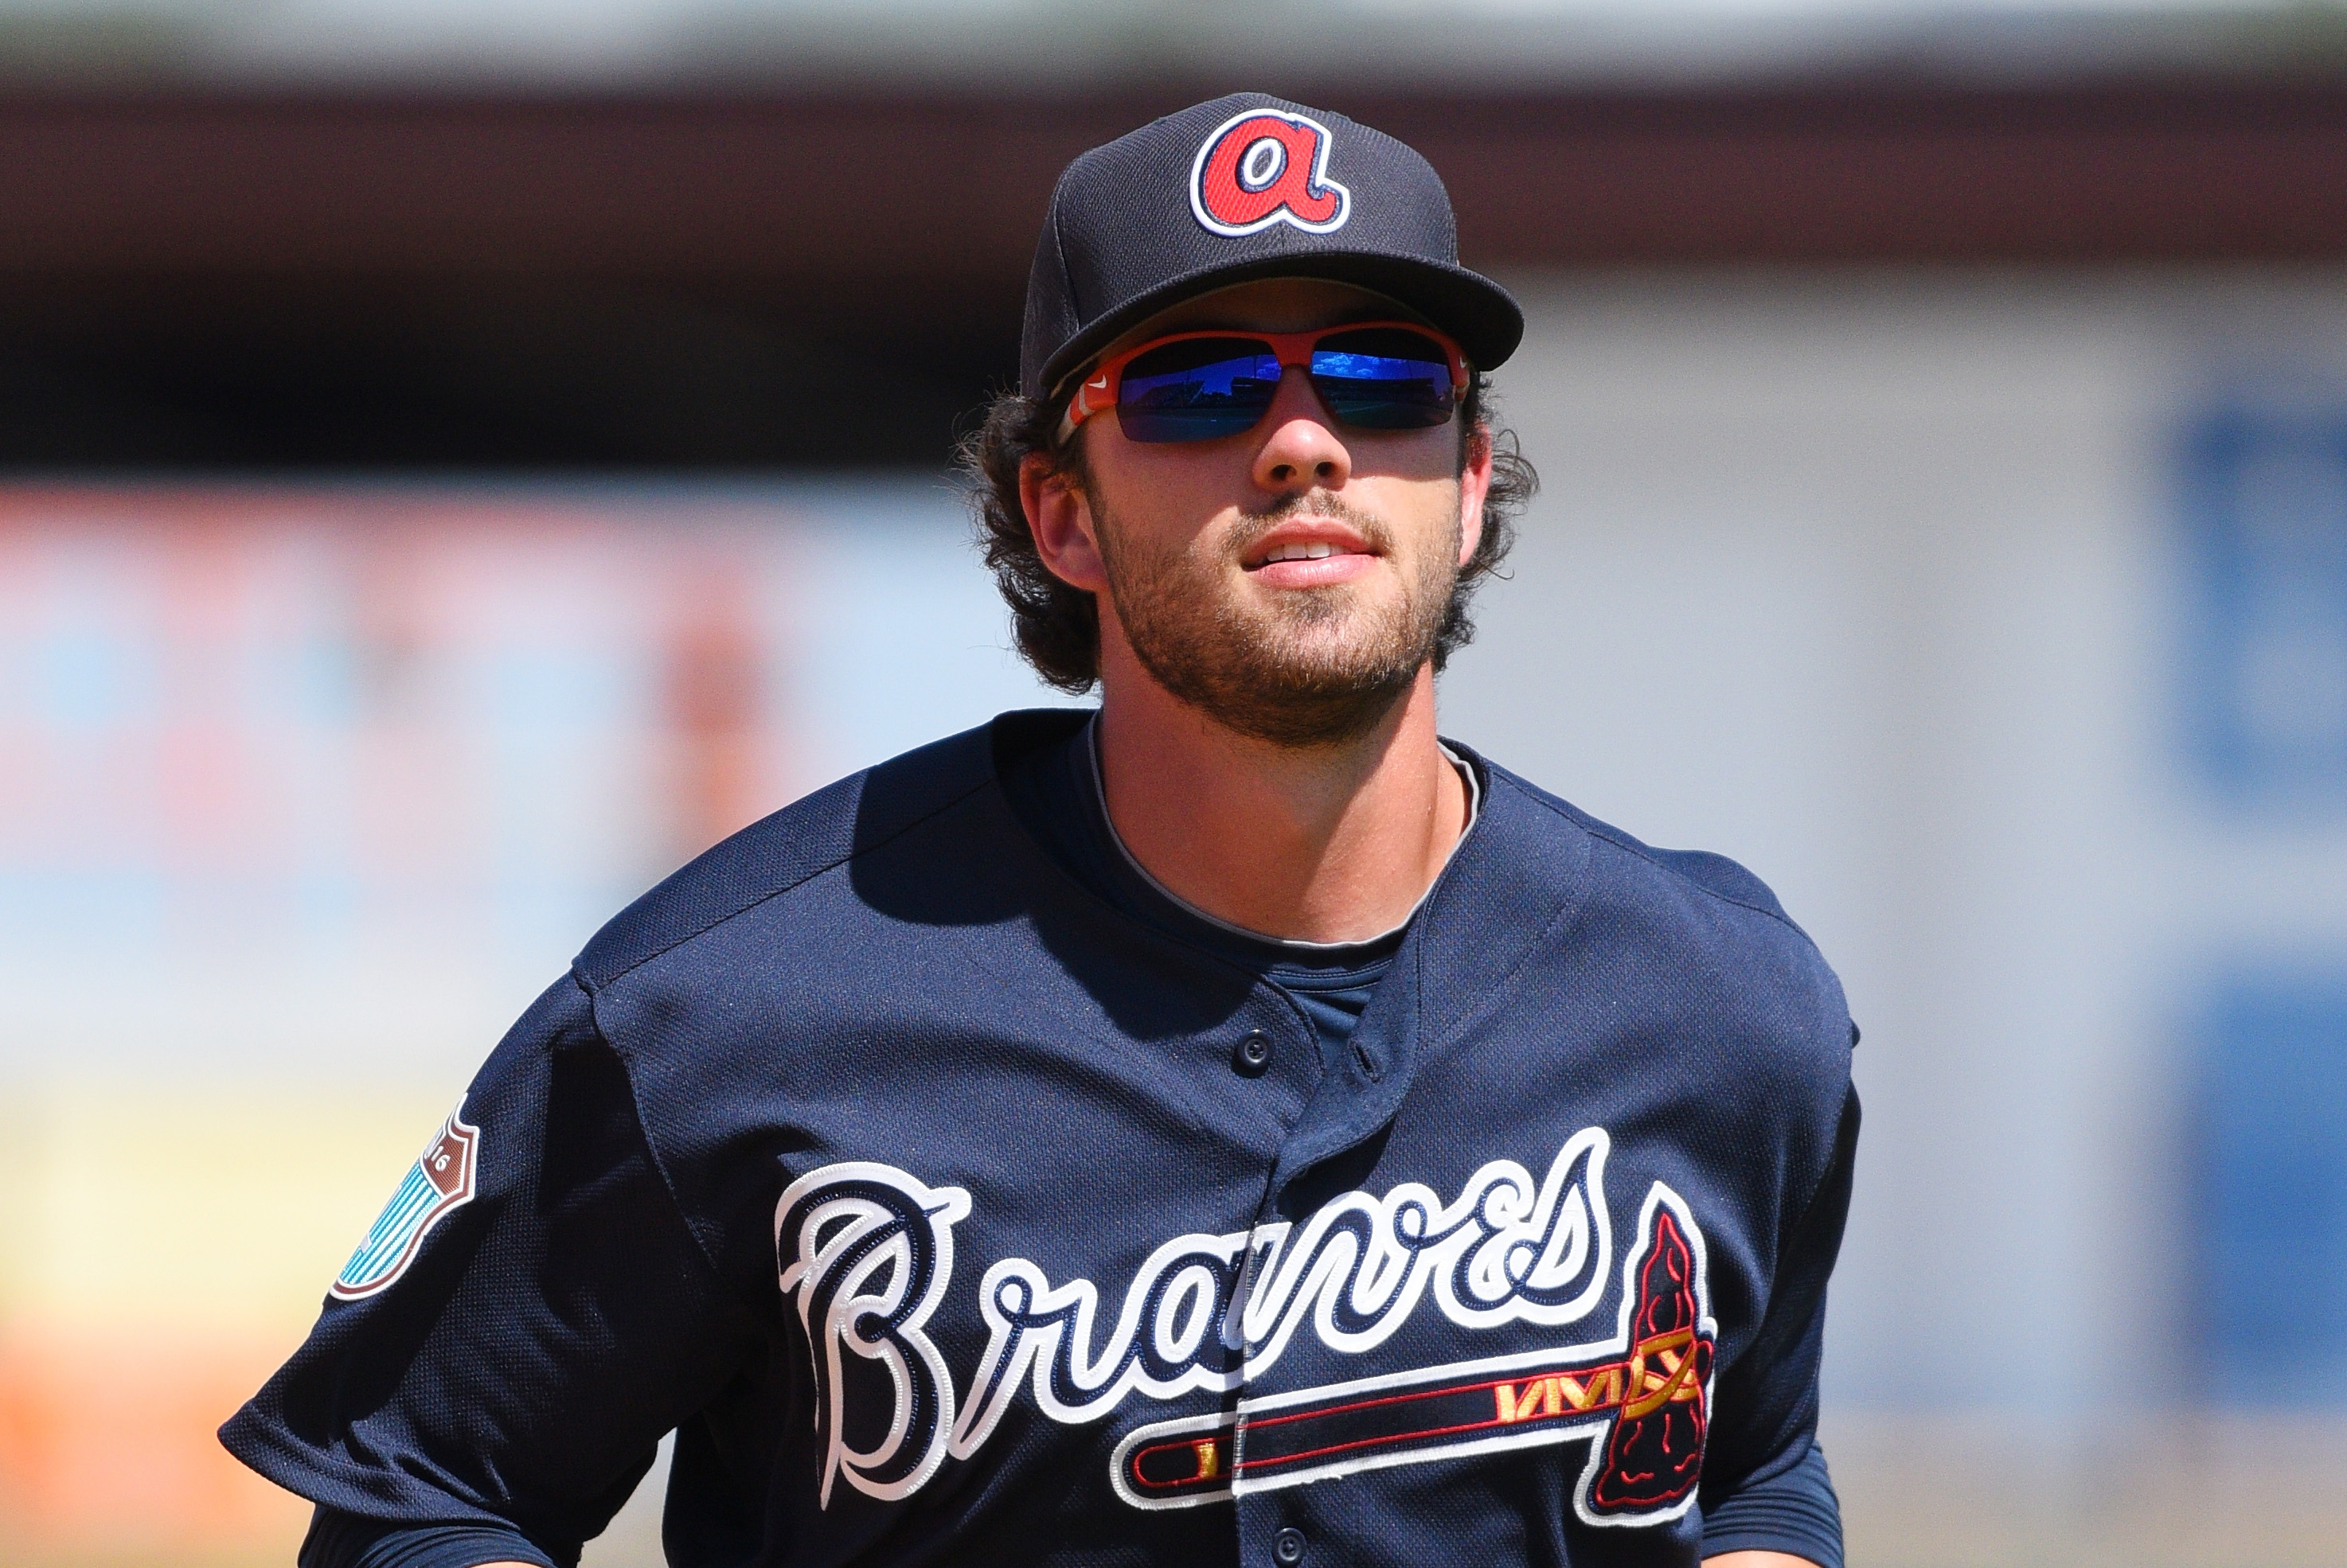 Who's That Guy? No. 1 Overall MLB Draft Pick Dansby Swanson!